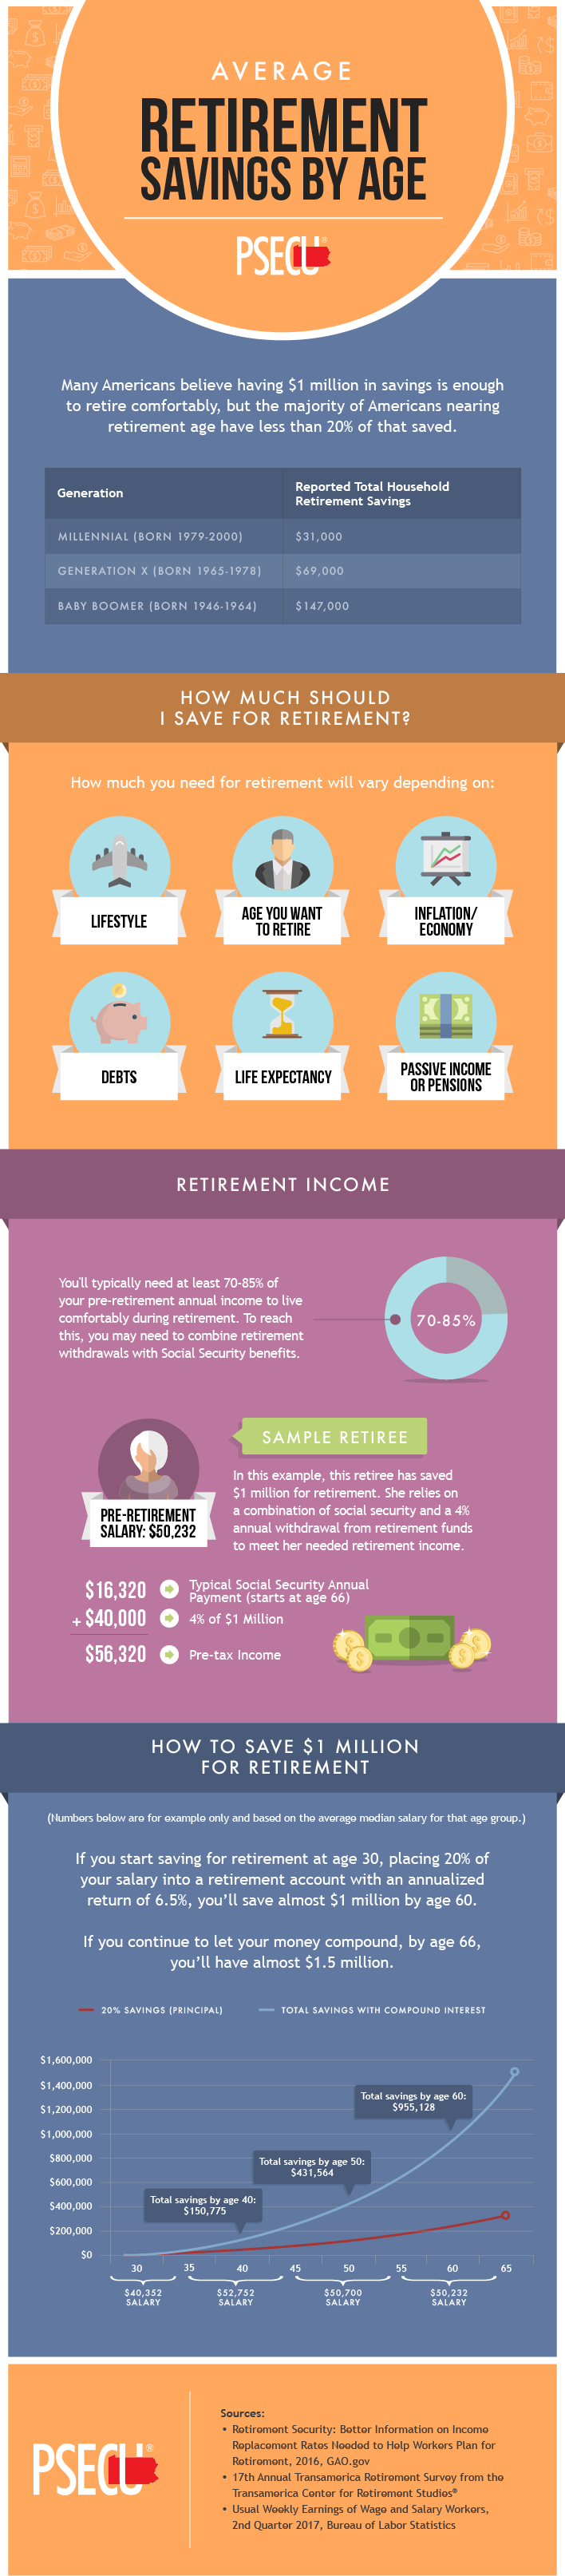 Average Retirement Savings by Age Infographic